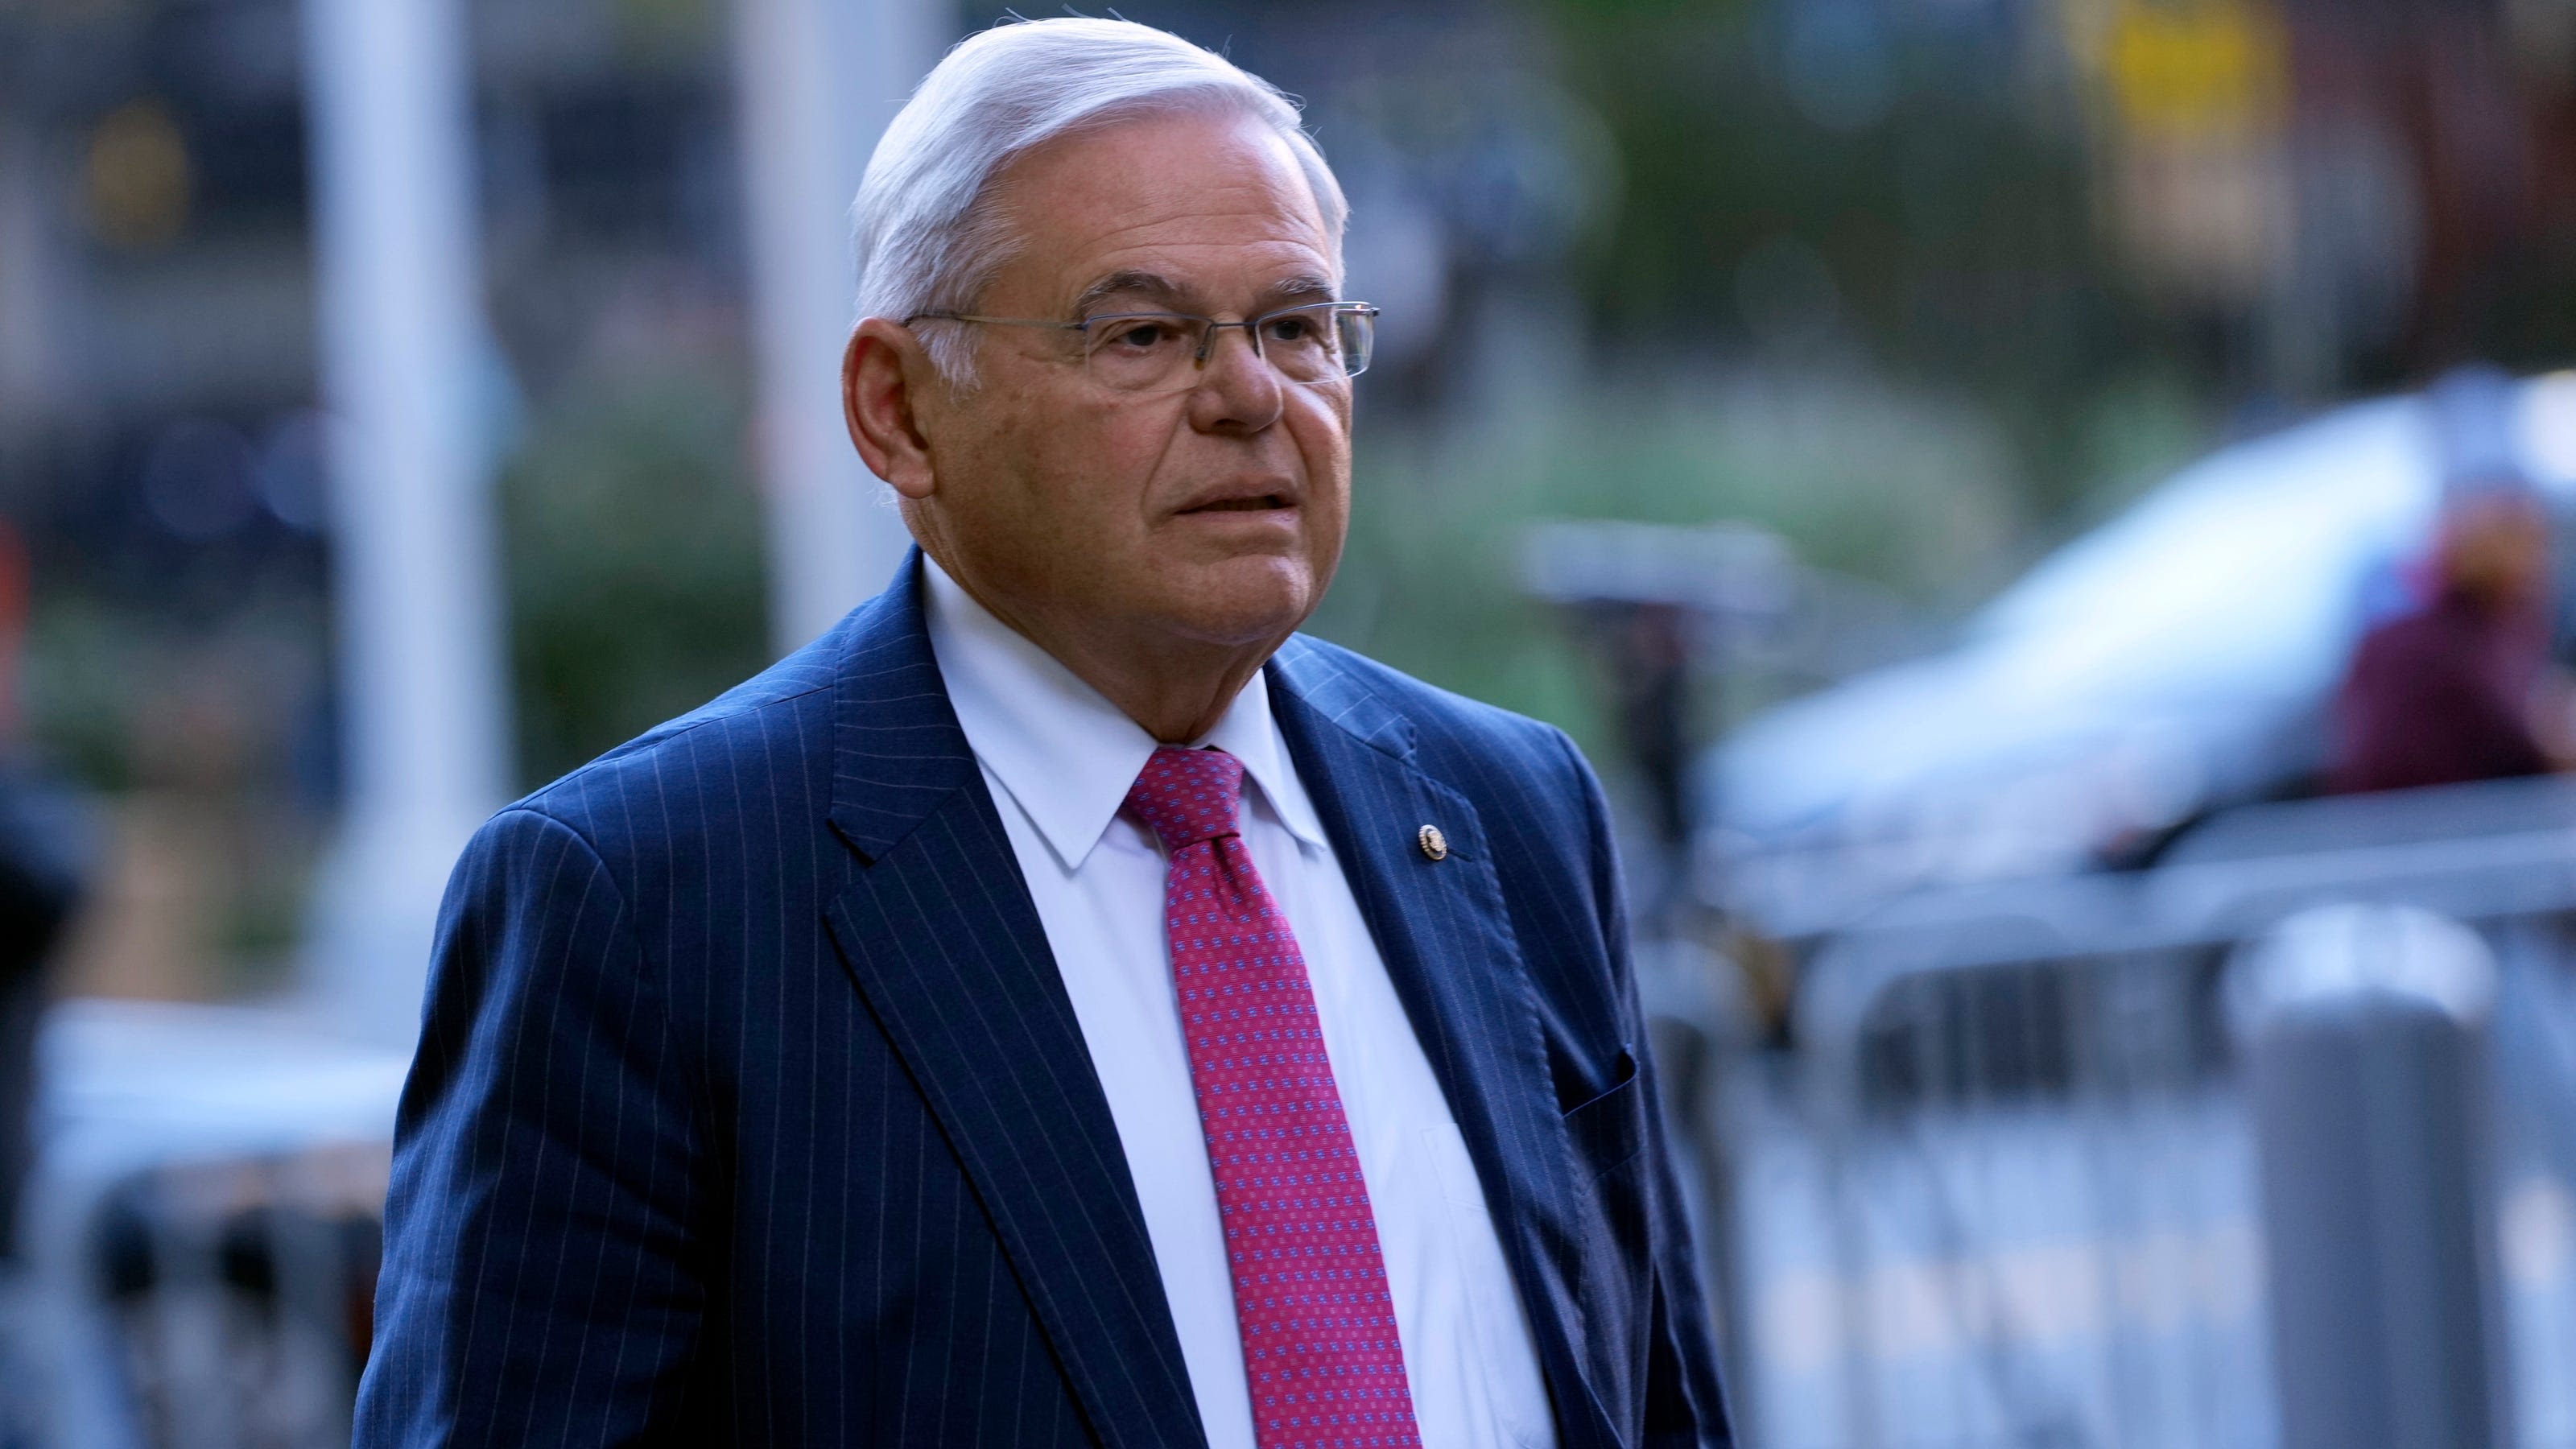 Bob Menendez's trial begins Monday. How will his lawyers frame their defense strategy?